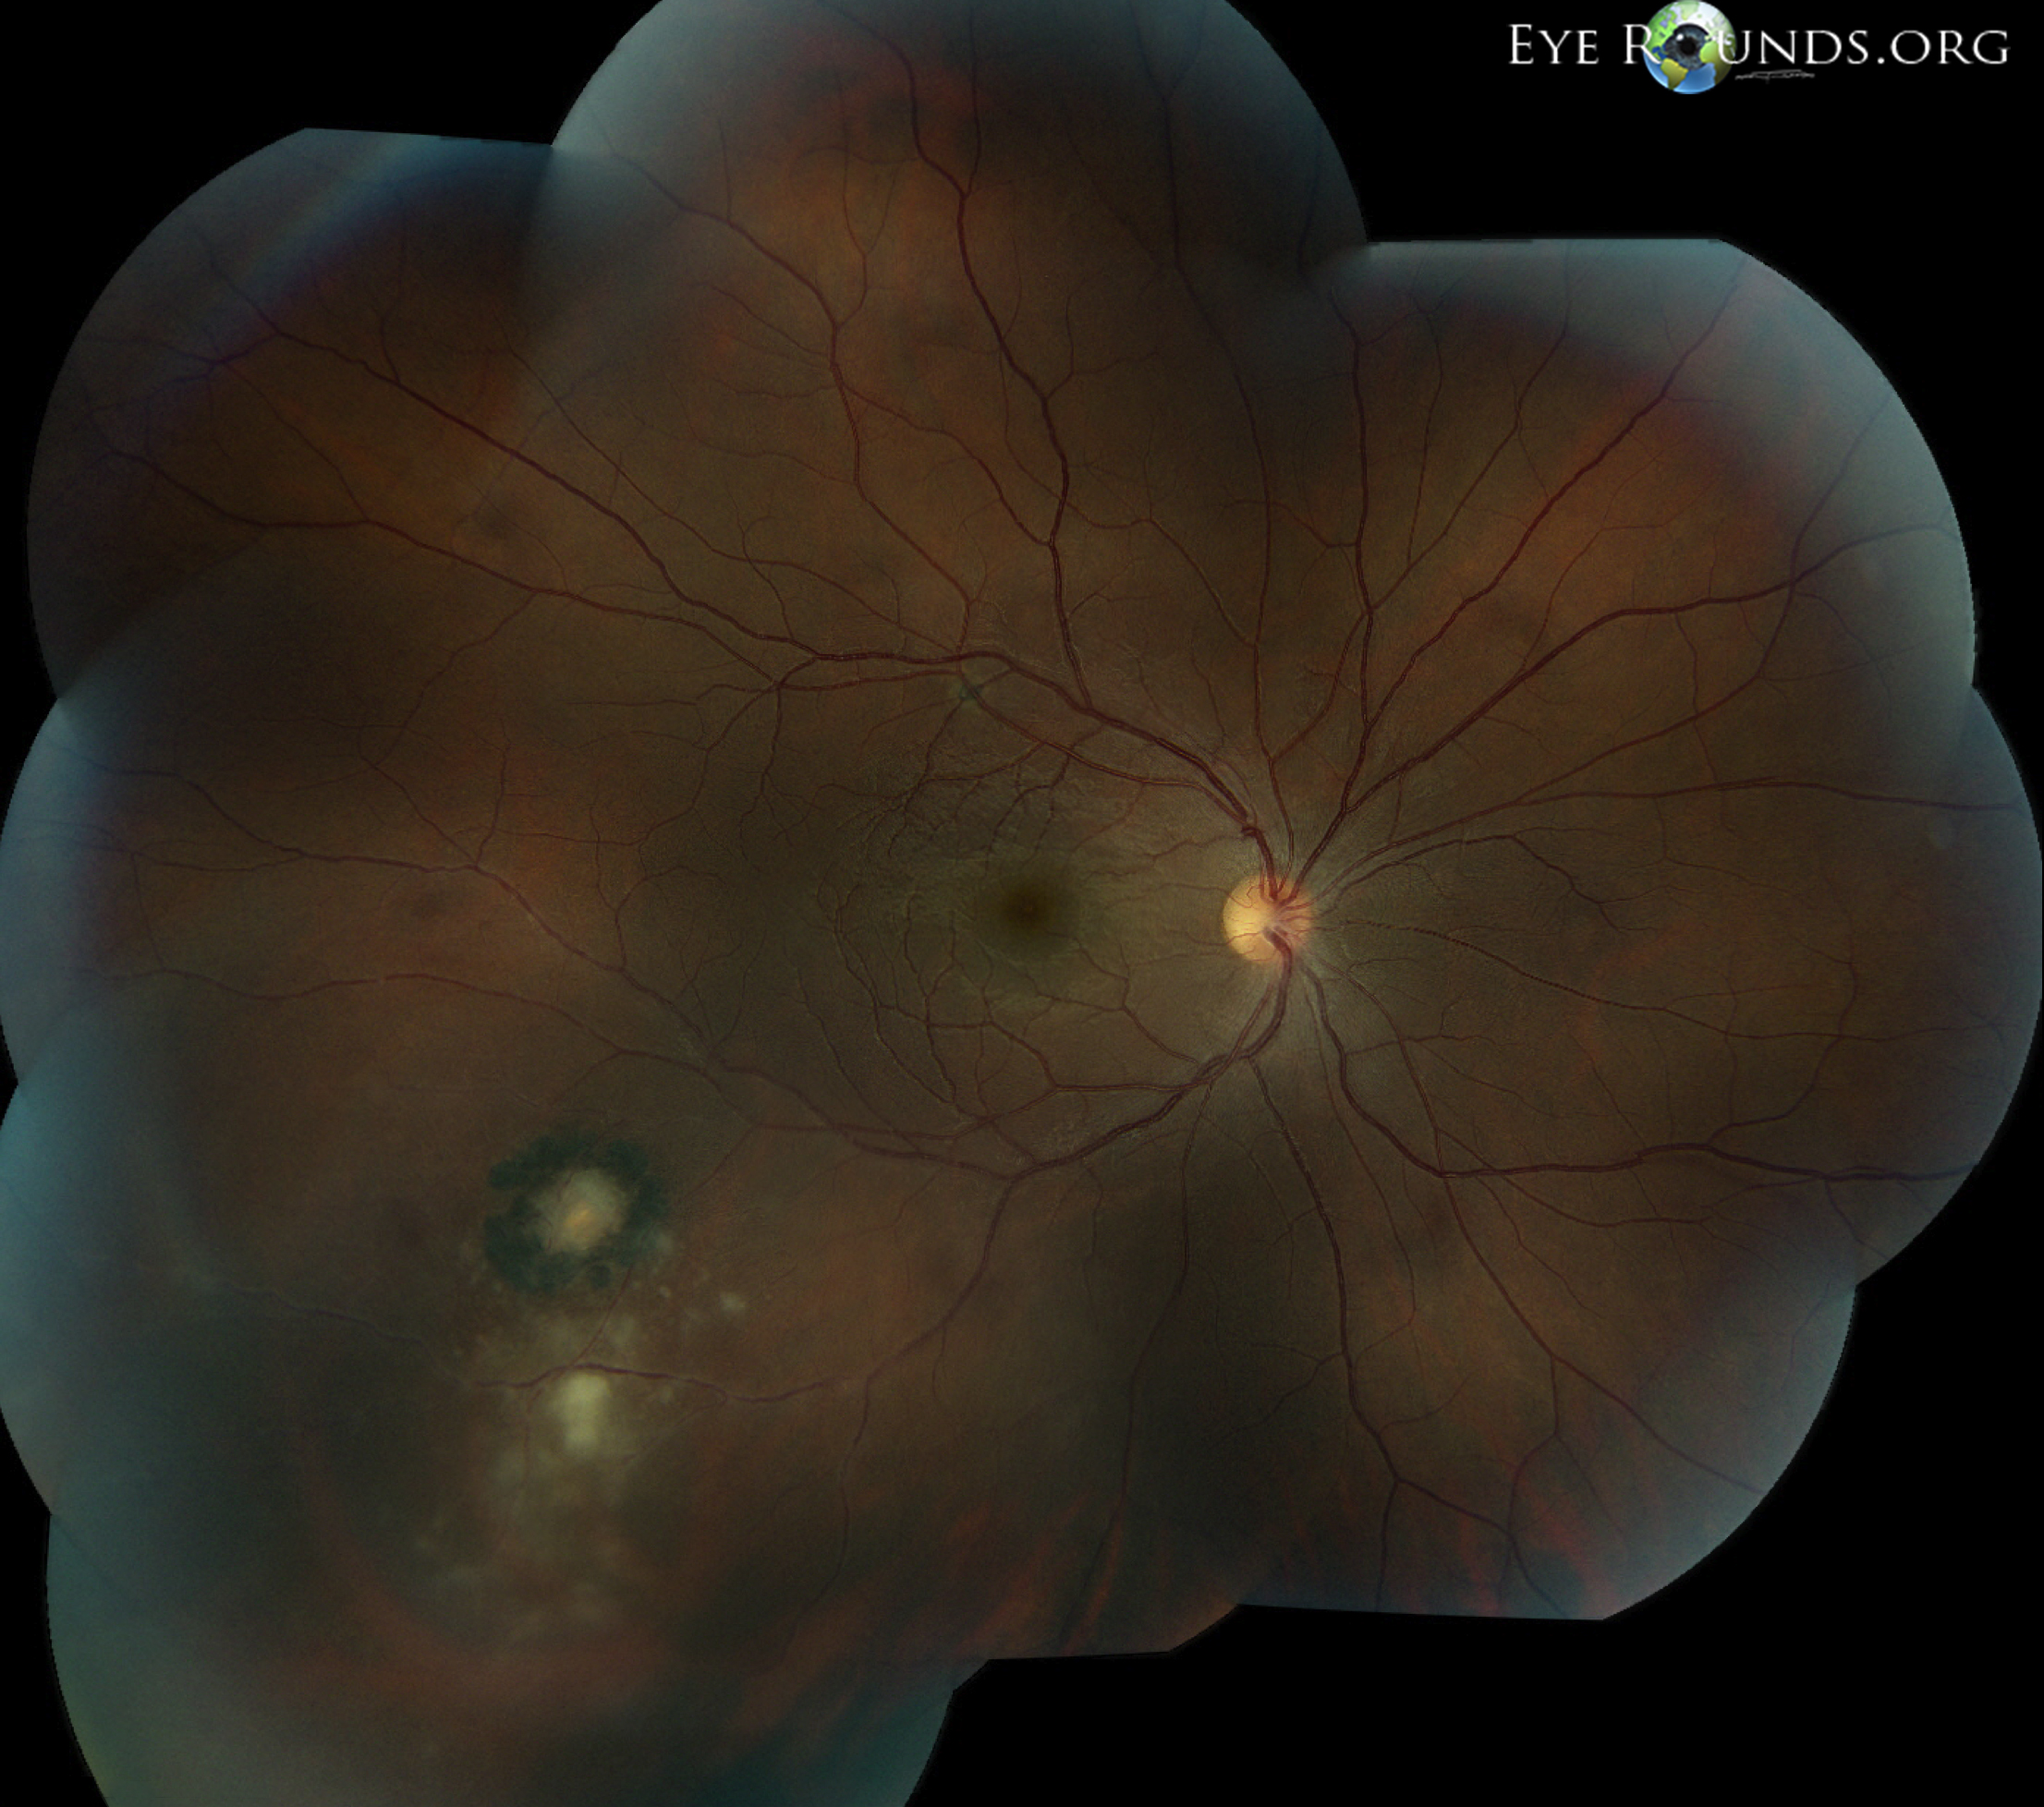 Dilated fundus examination of the right eye showed a well-circumscribed small old peripheral pigmented scar just beyond the inferotemporal arcades